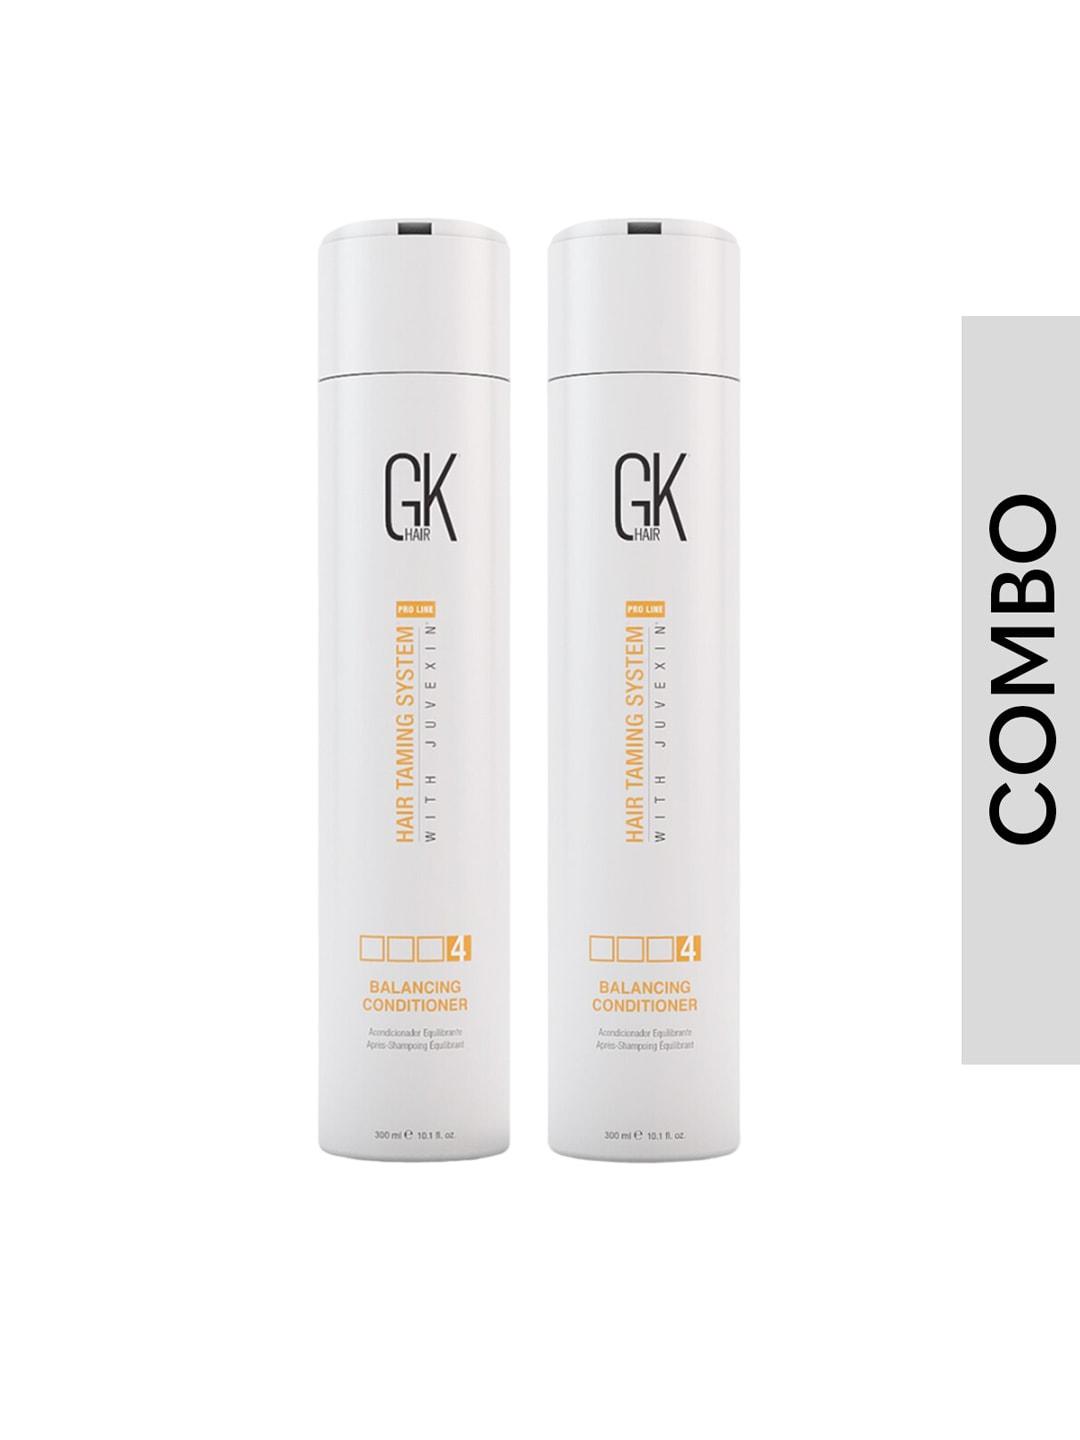 gk hair set of 2 hair taming system balancing conditioner with juvexin - 300 ml each